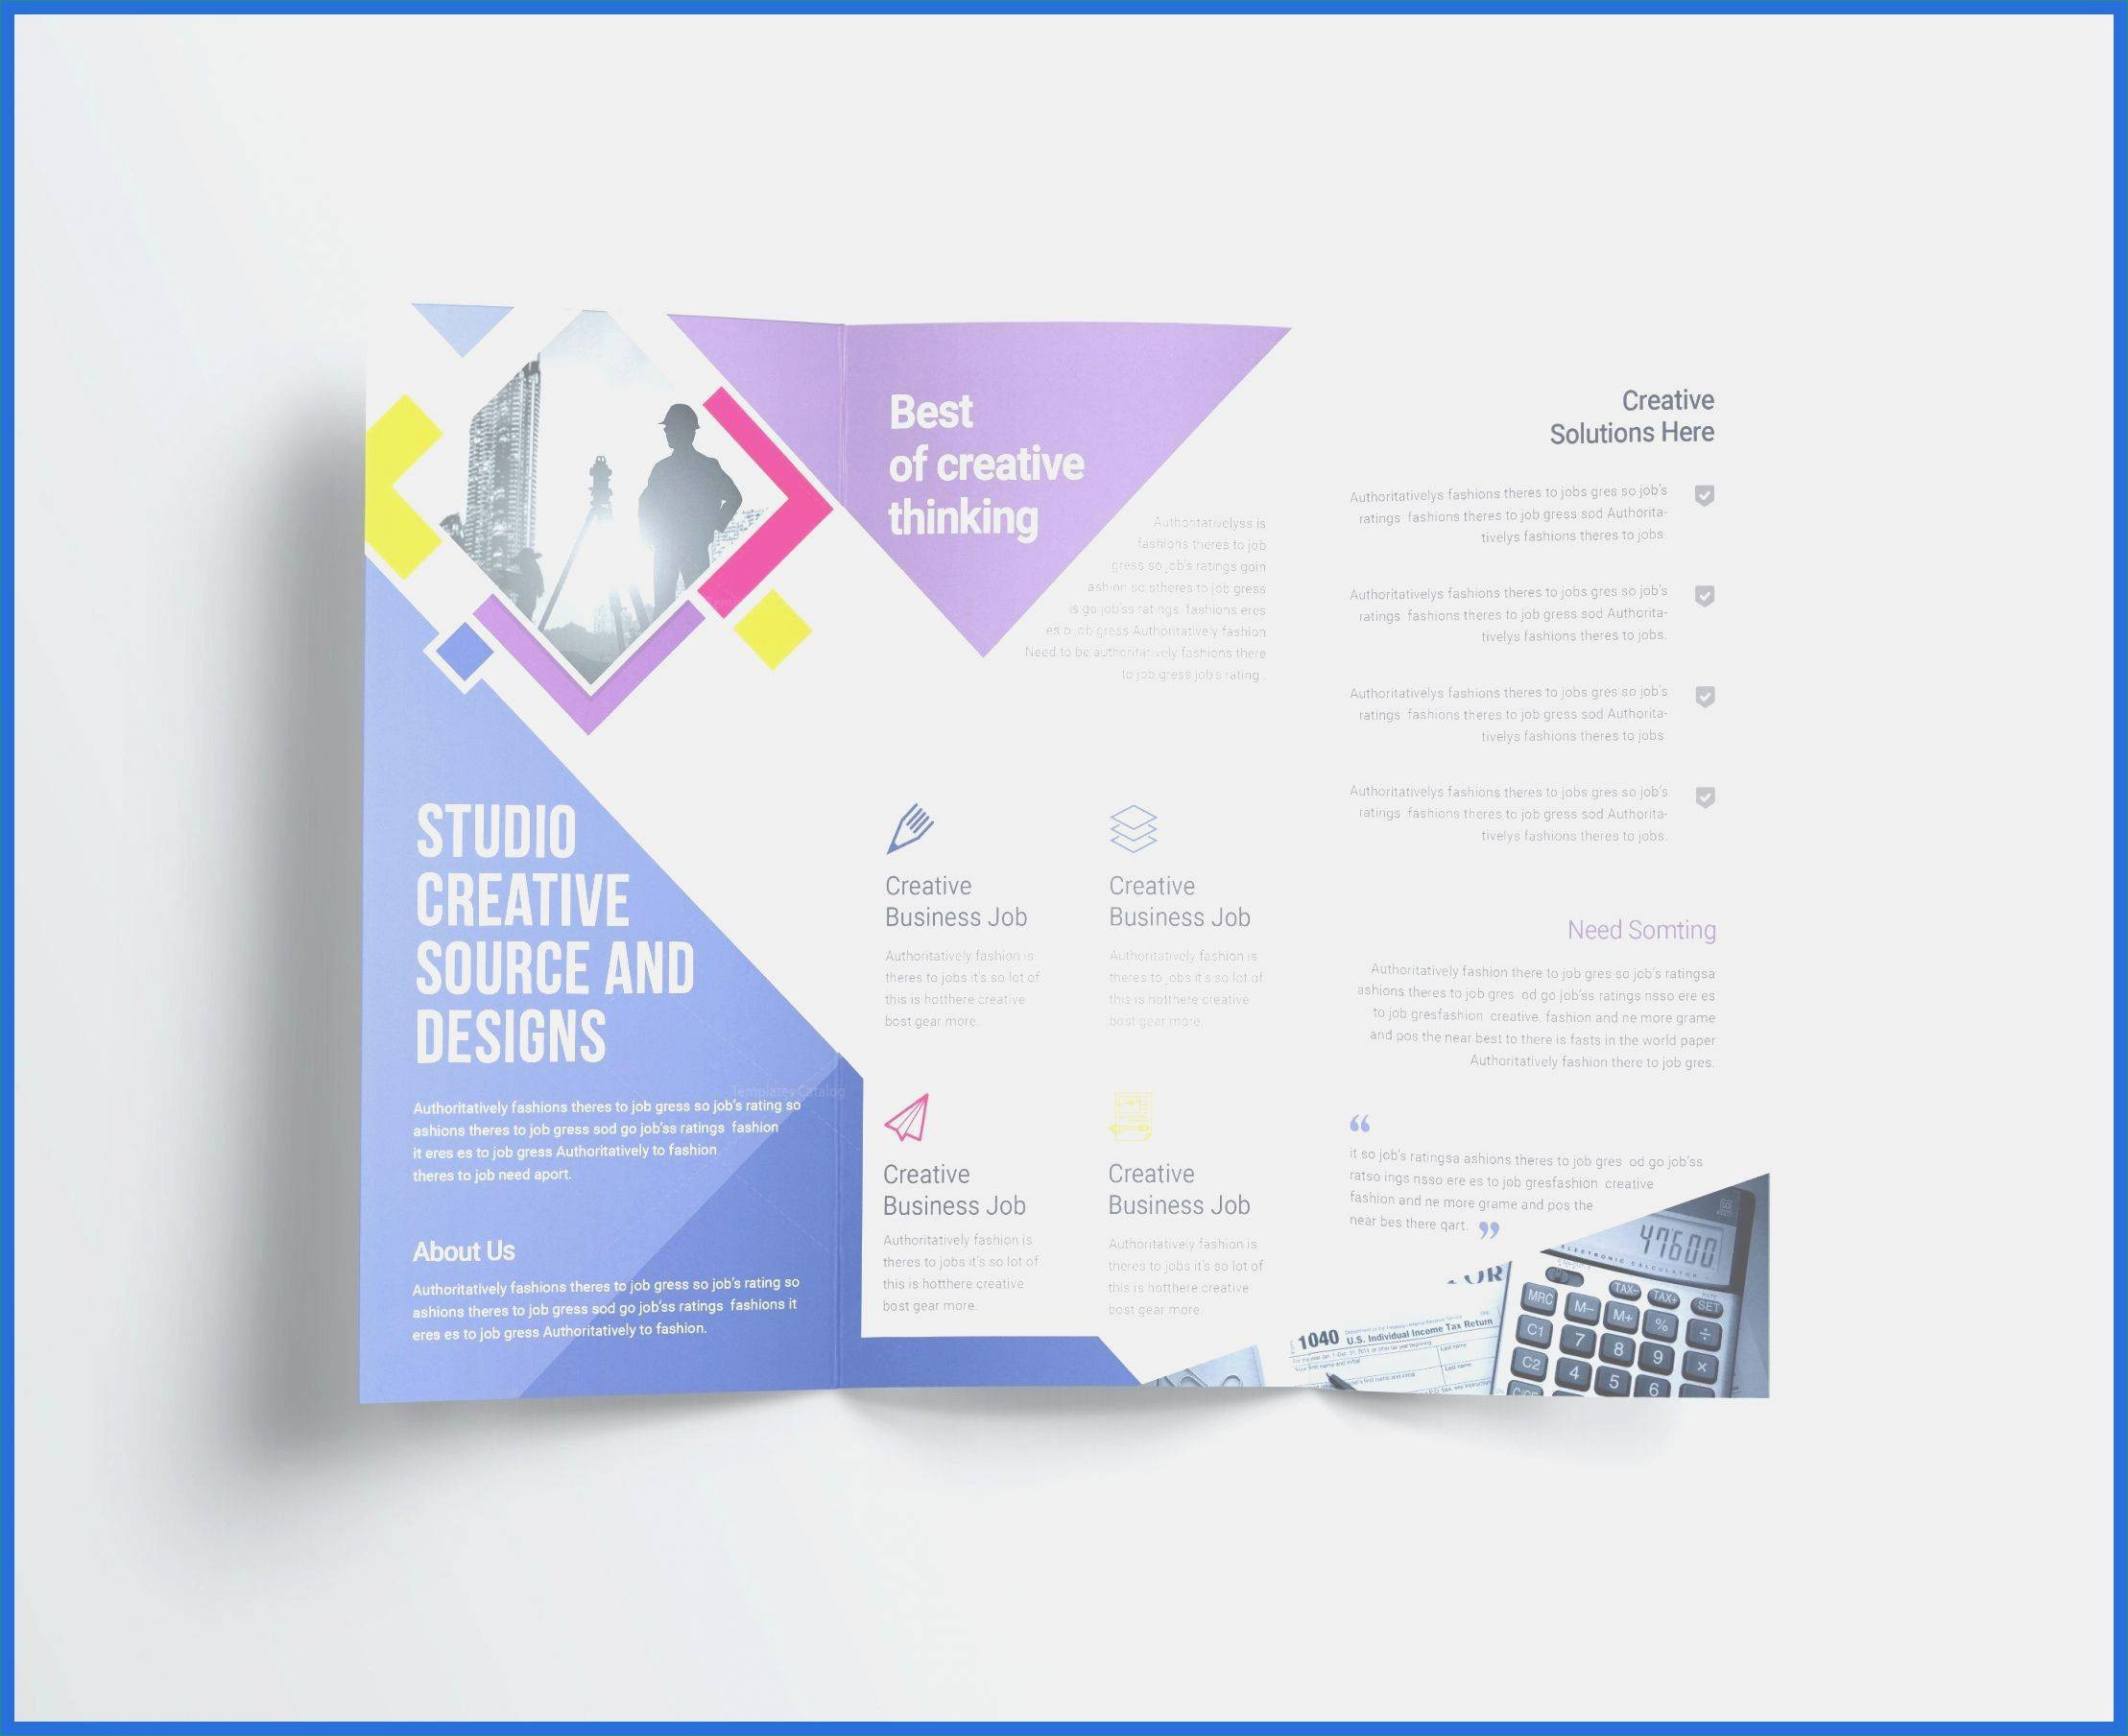 microsoft office themes powerpoint 2013 business card presentation template great ac298c286 36 business card template powerpoint 2010 powerpoint templates of business card presentation templ